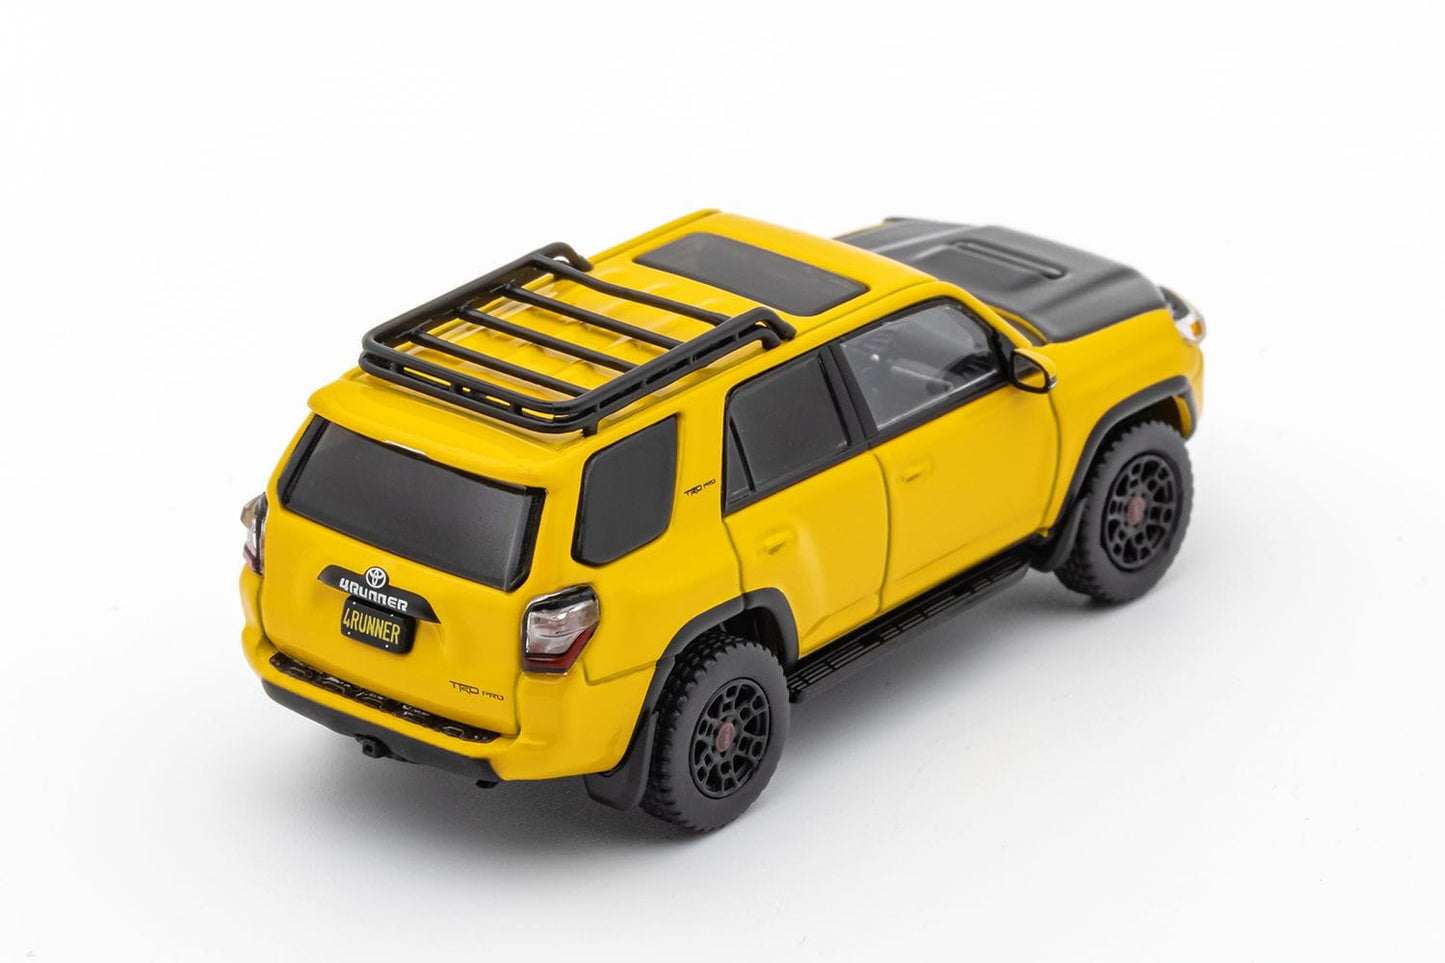 GCD Toyota 4RUNNER SUV 4x4 OFF ROAD in Yellow